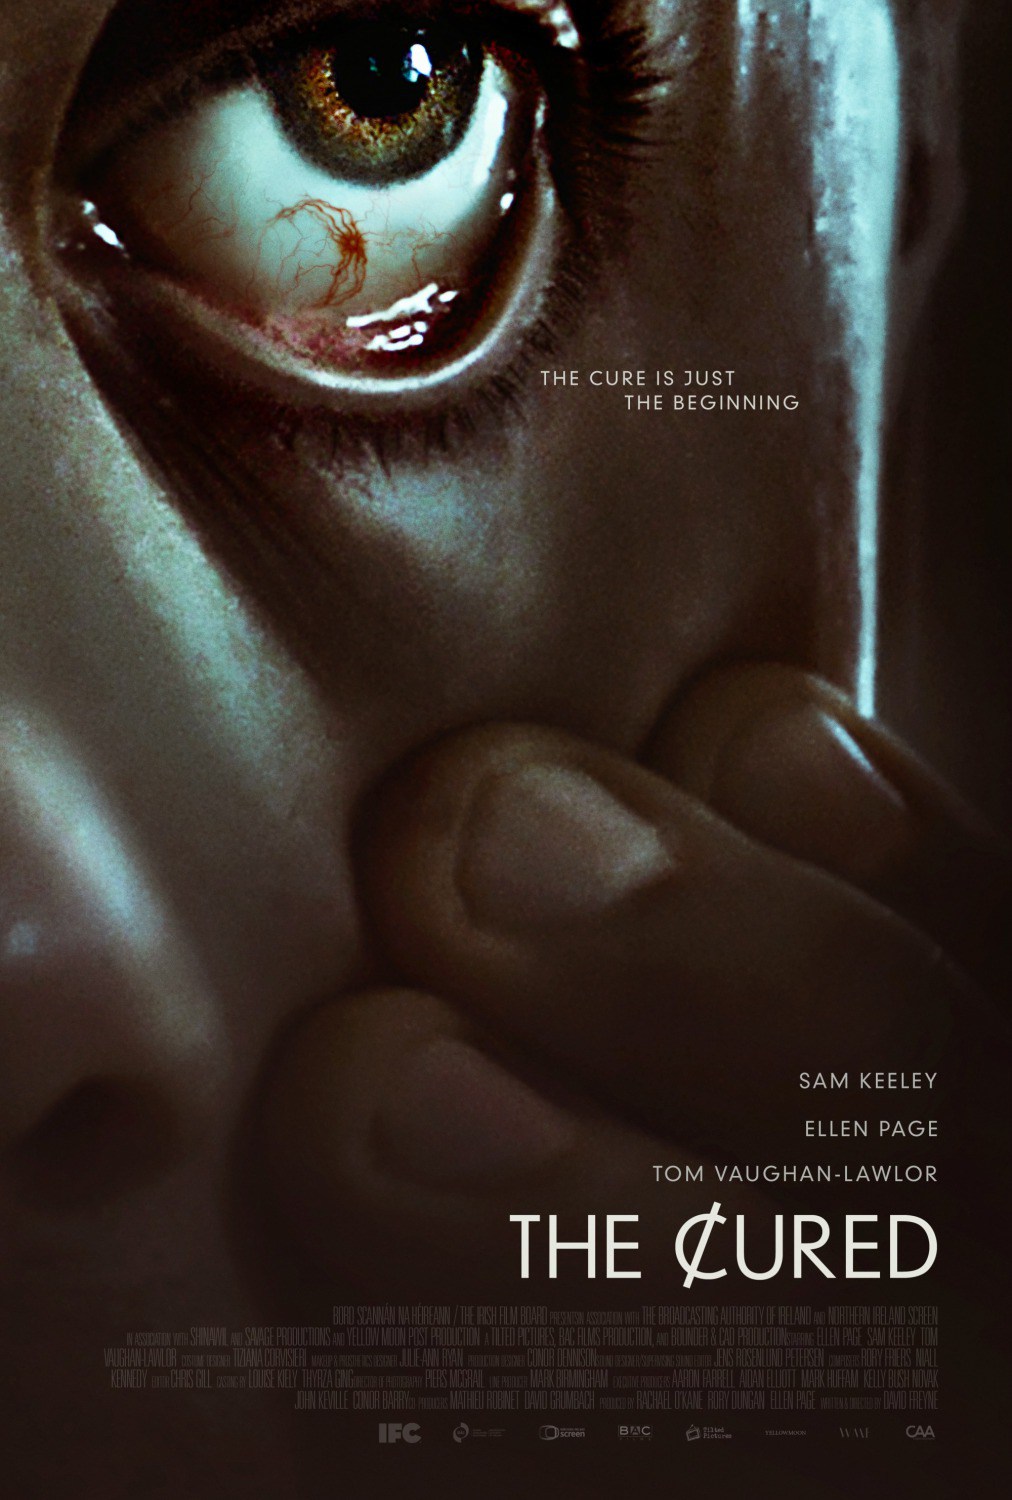 THE CURED poster IFC